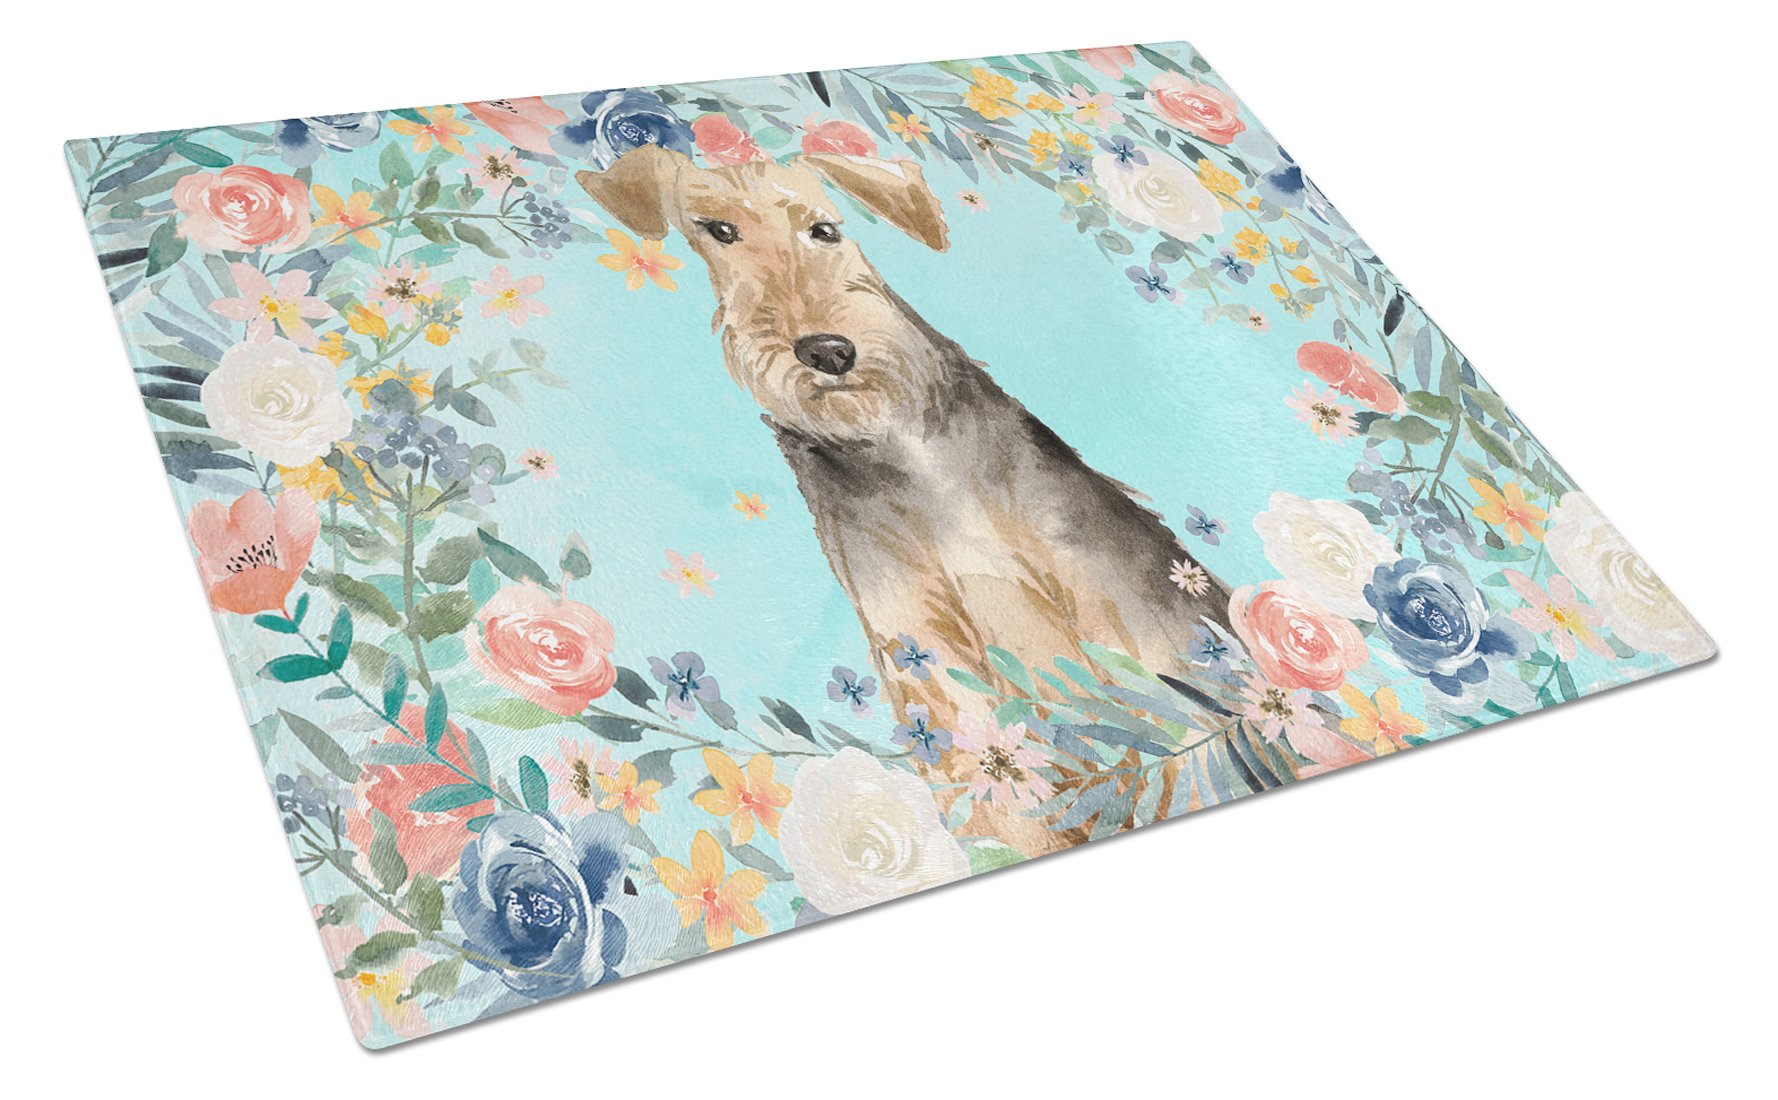 Airedale Terrier Glass Cutting Board Large CK3405LCB by Caroline's Treasures